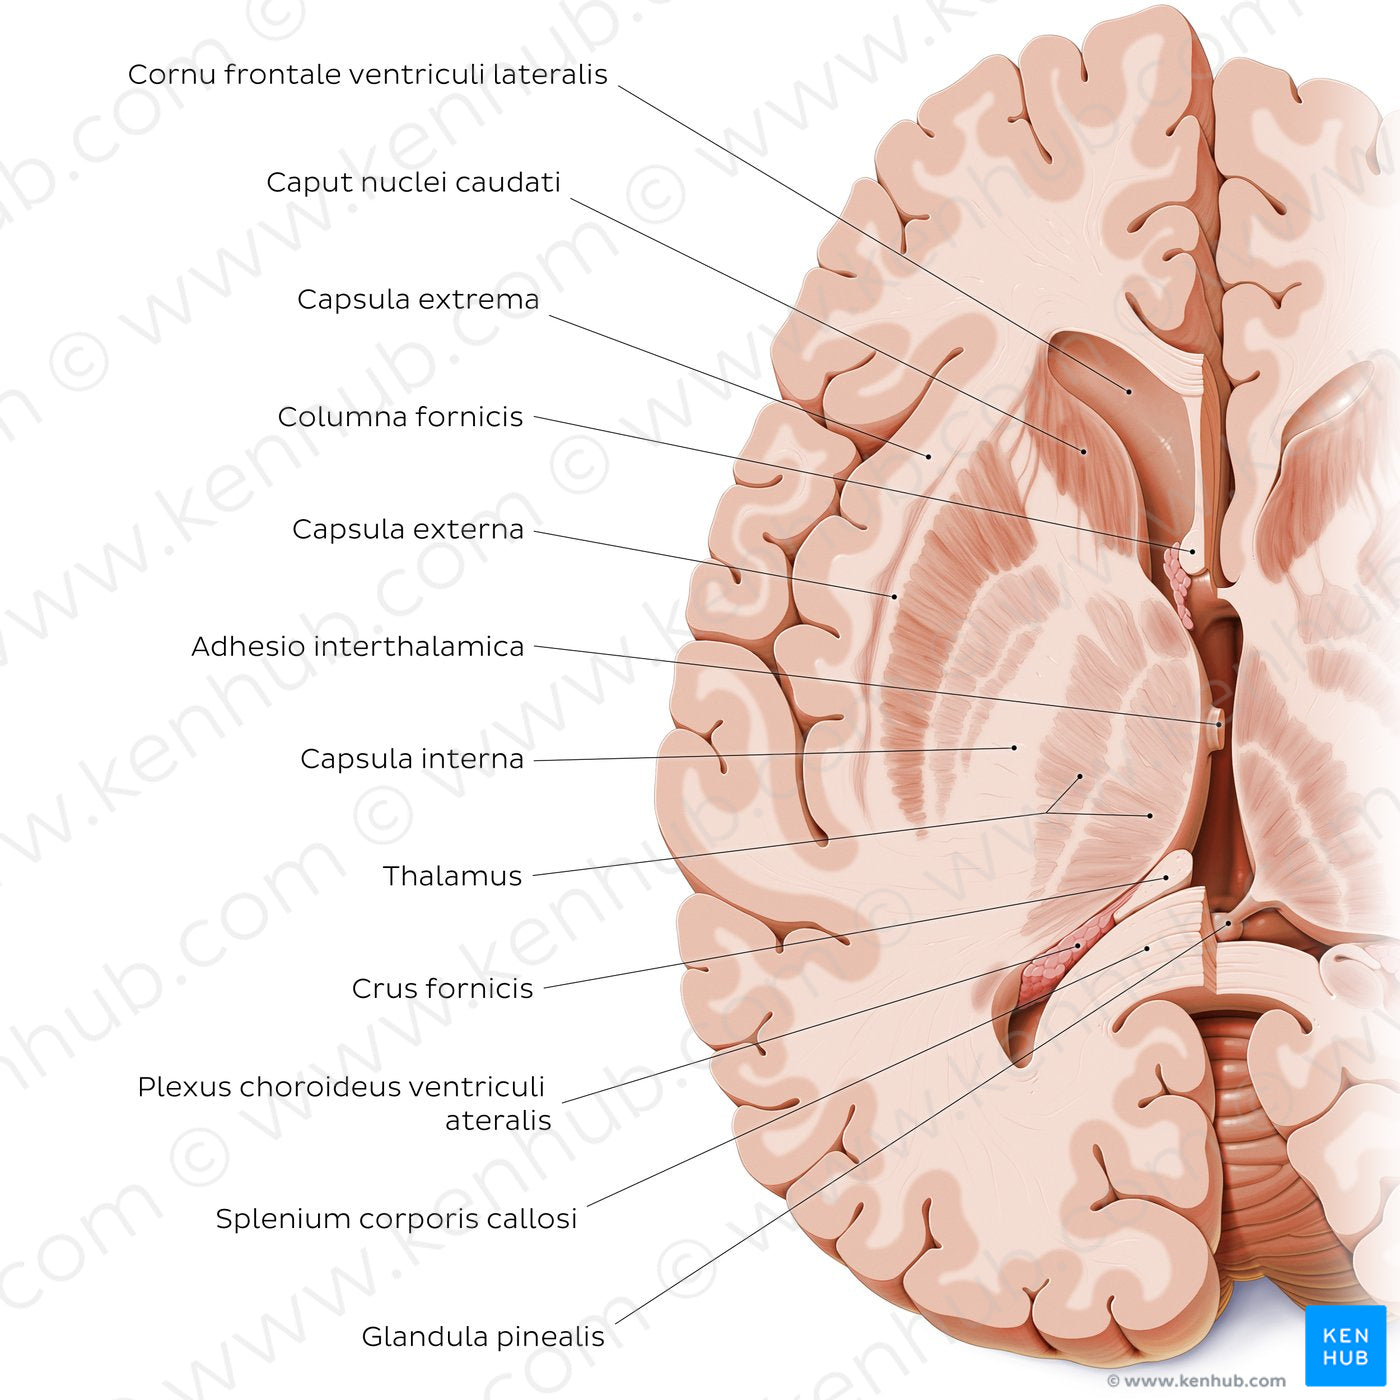 Horizontal section of the brain: Section A (Latin)